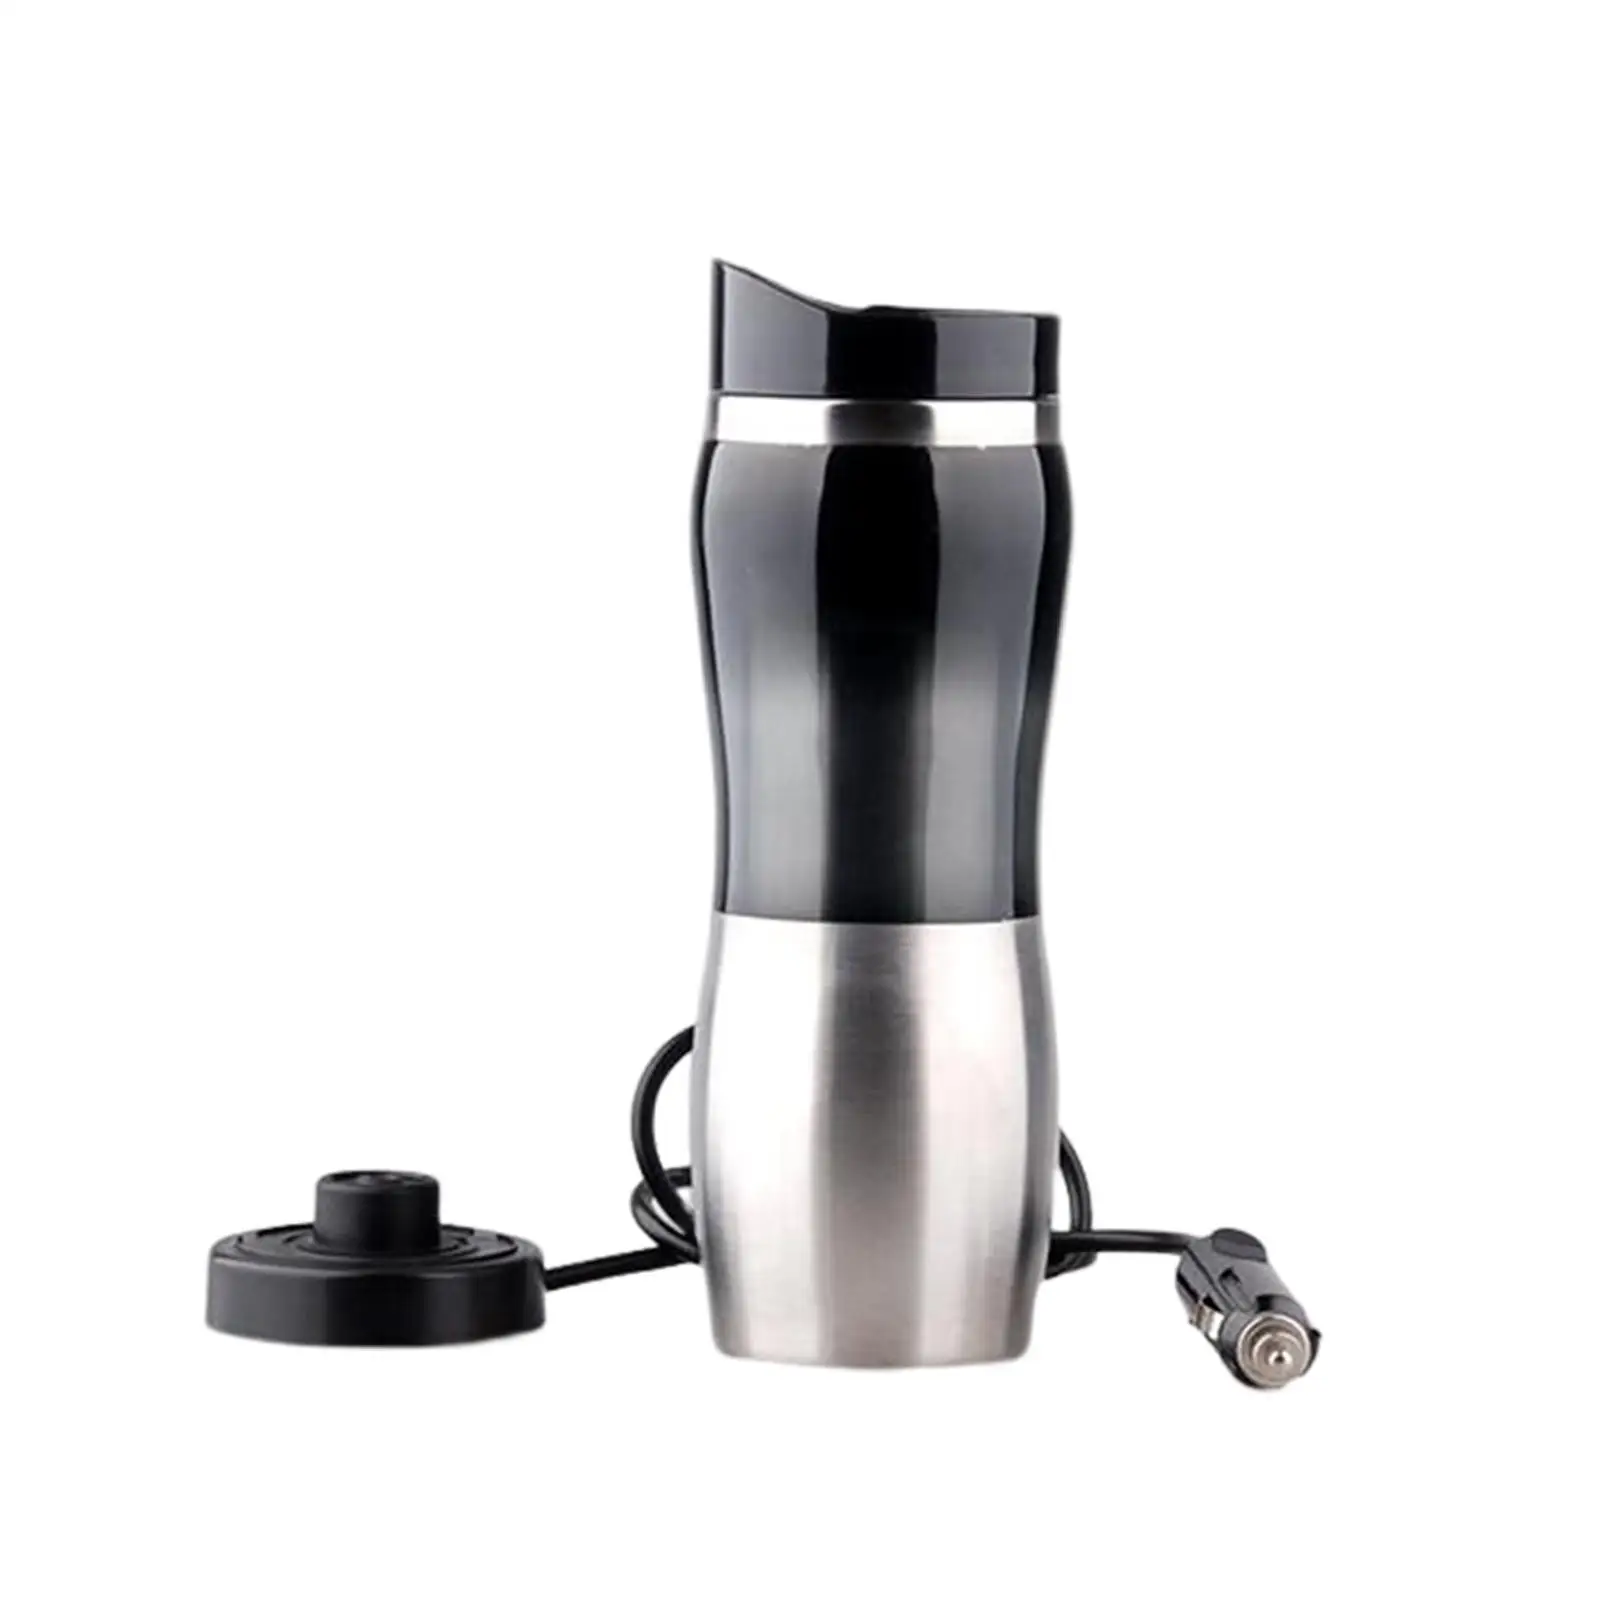 Car Electric Kettle 400ml 12V Stainless Steel Portable in Car Auto Heating Bottle Mug for Tea Travel Camping Boat Hot Water Eggs